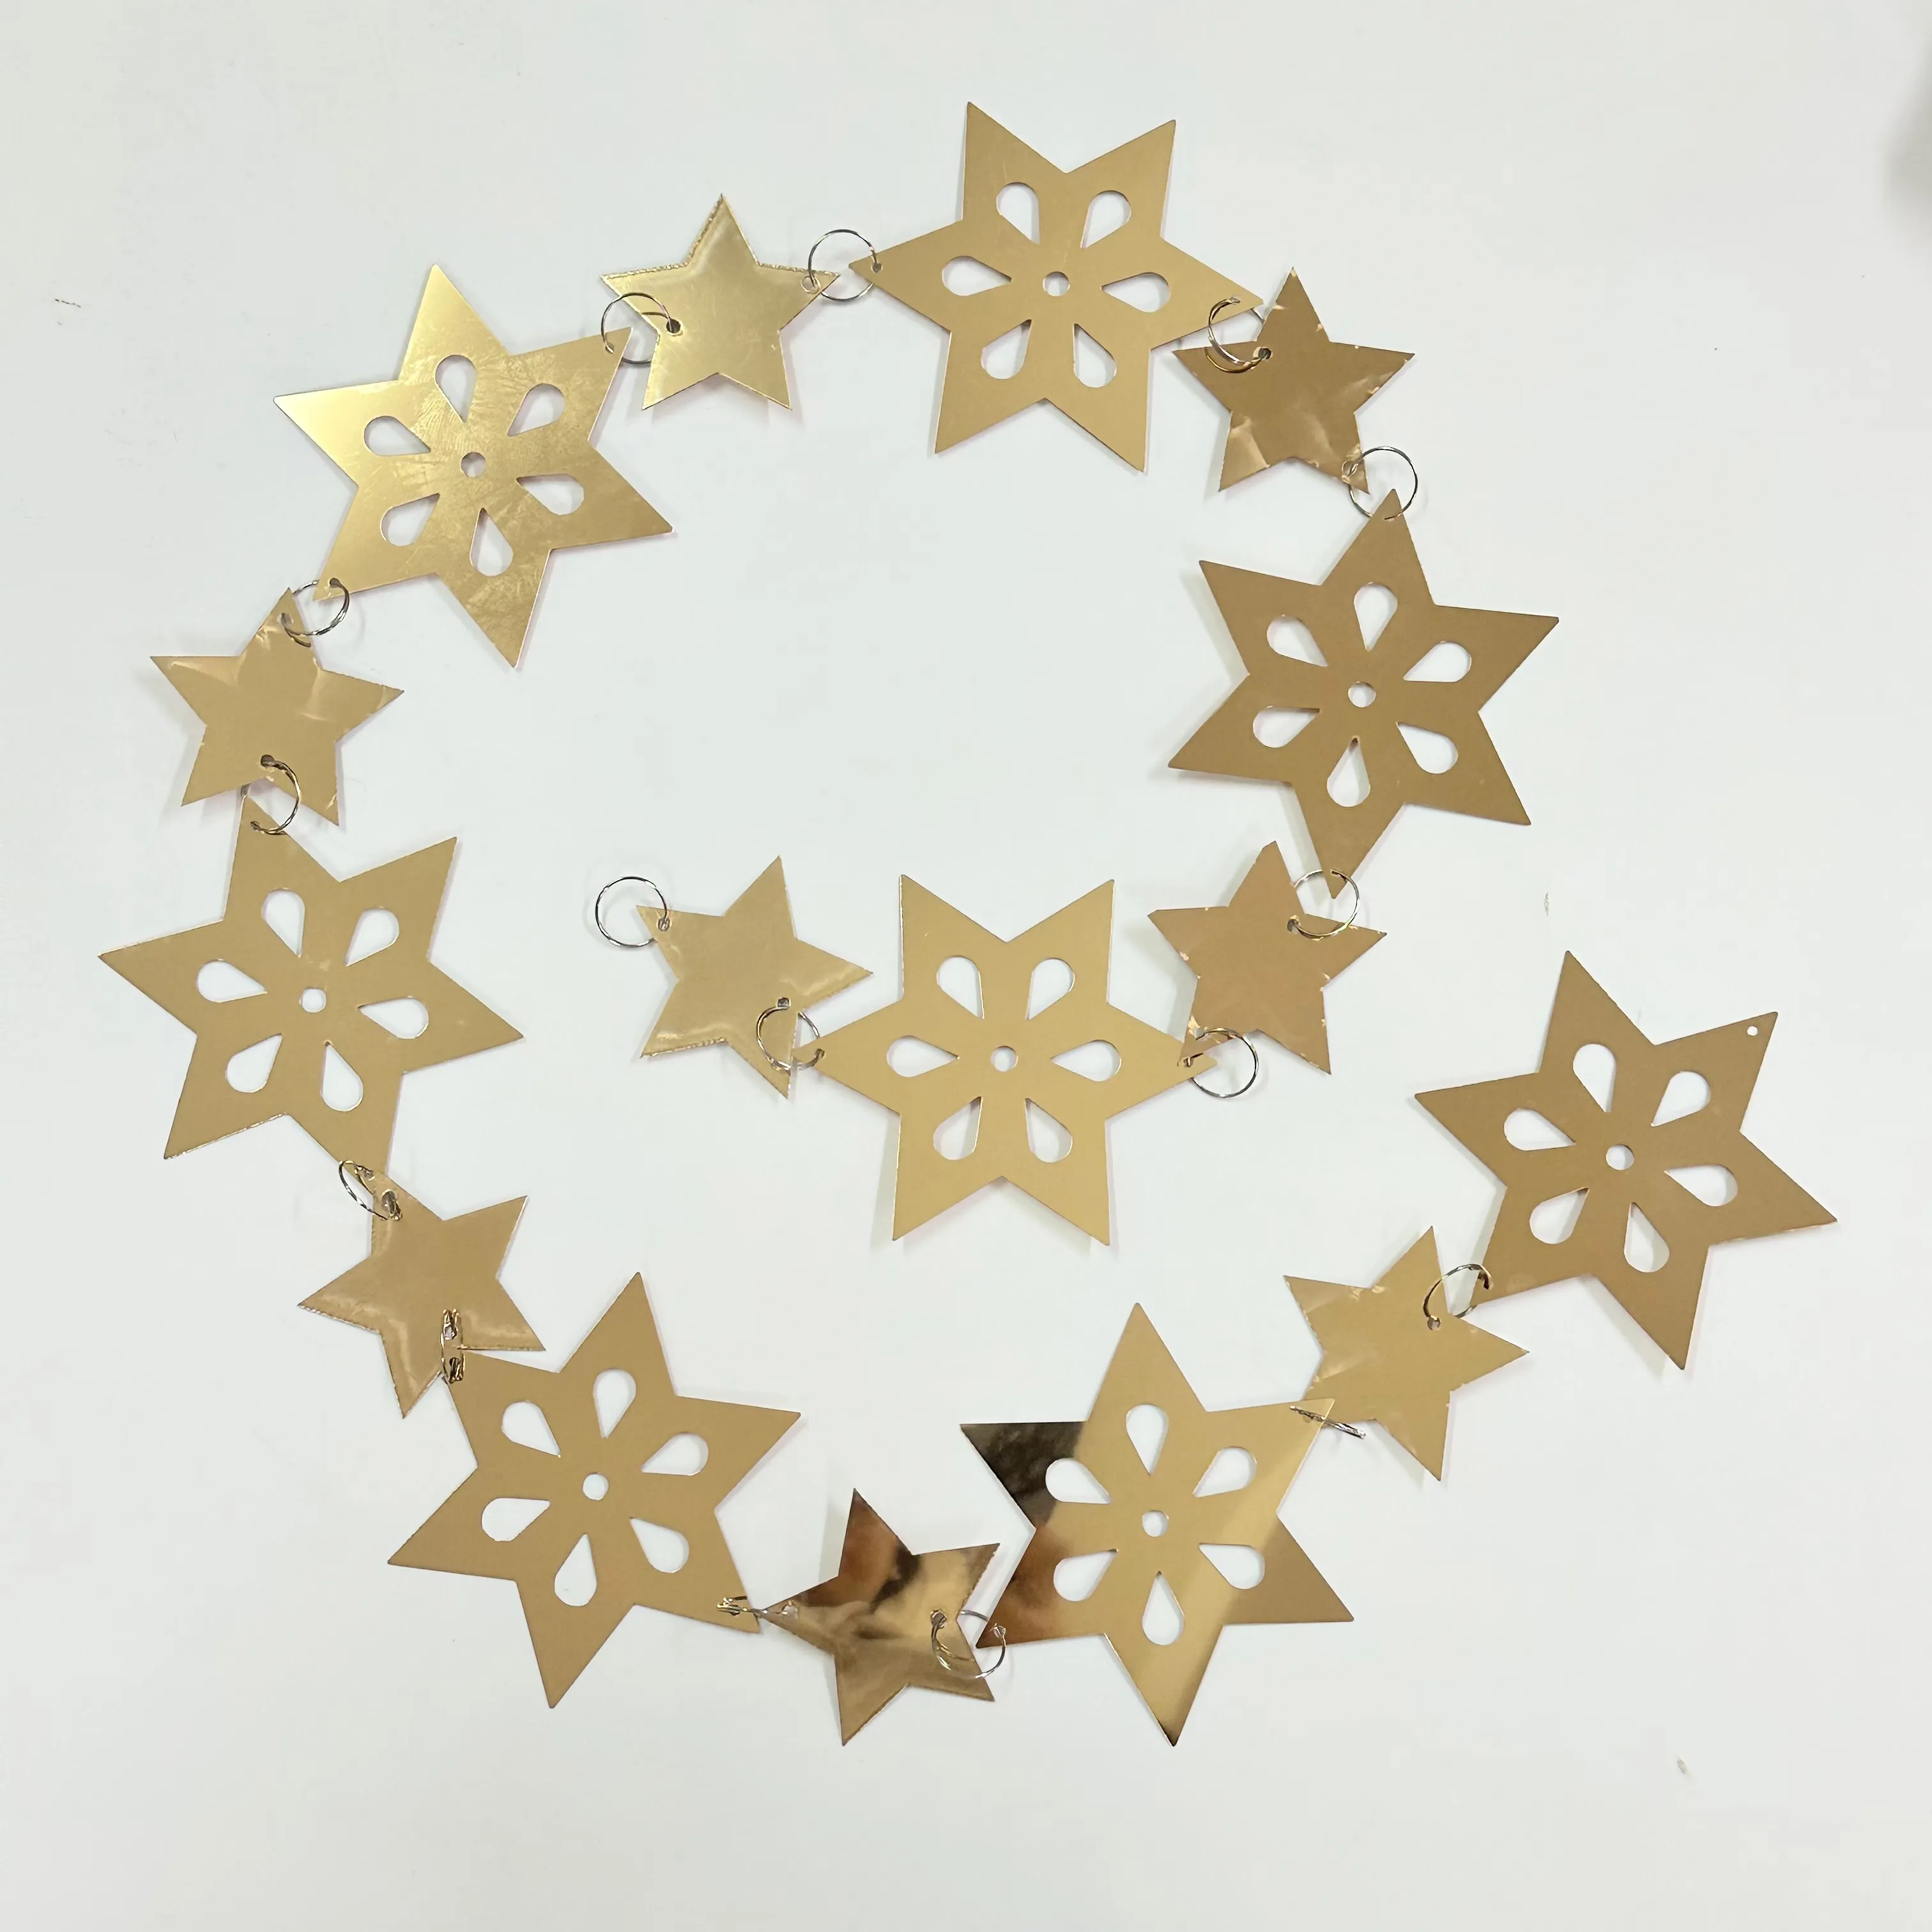 Mirror size stars glitter gold and silver round hanging circle garland Wedding party scene Layout Christmas decorations